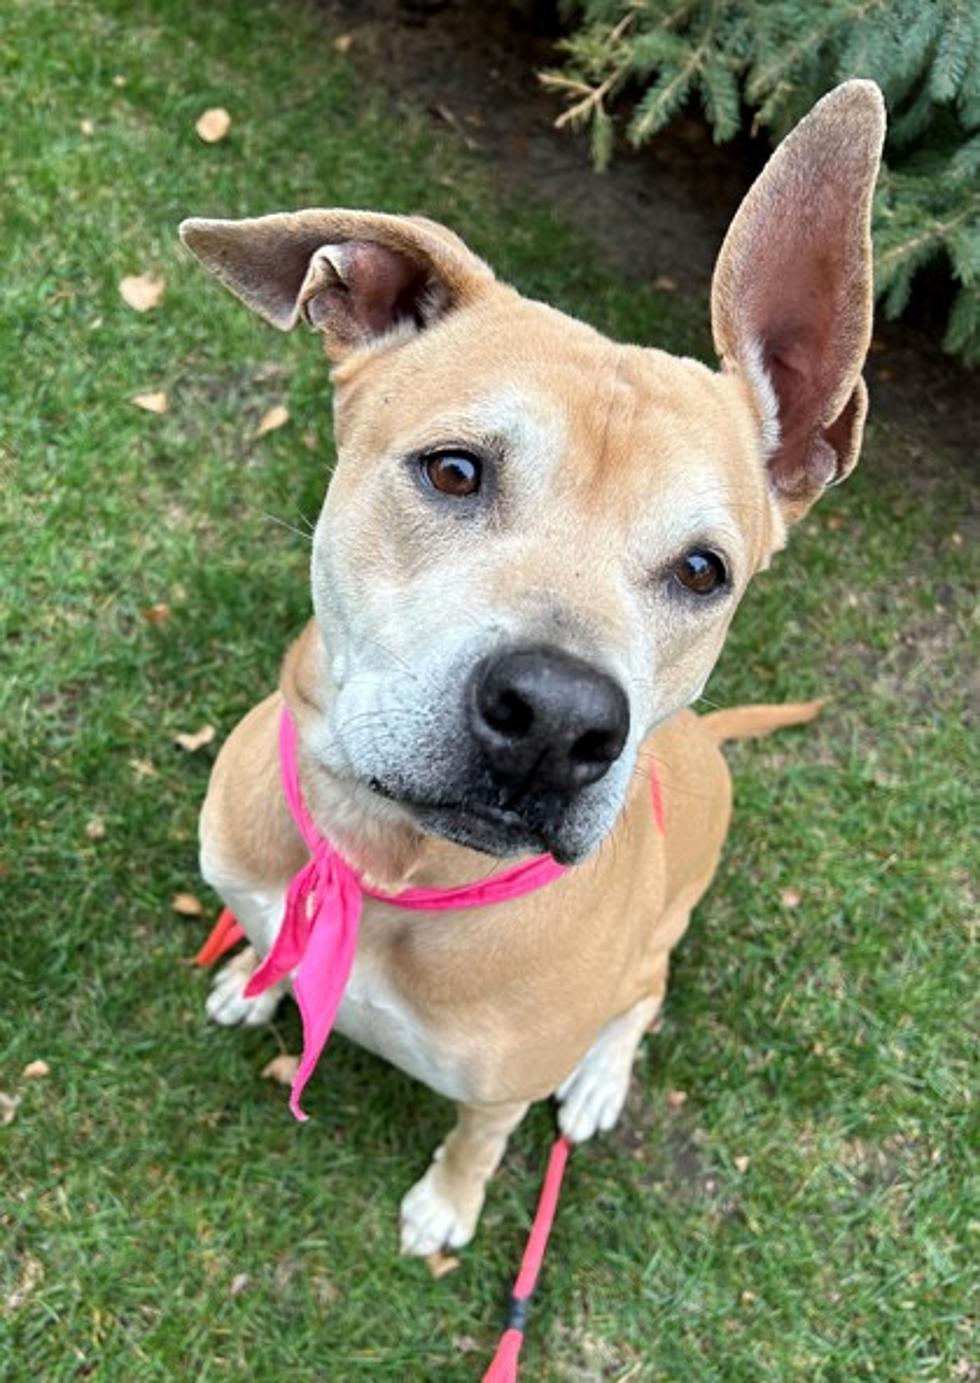 Our Adoptable Pet of the Week: Meet Lacey!